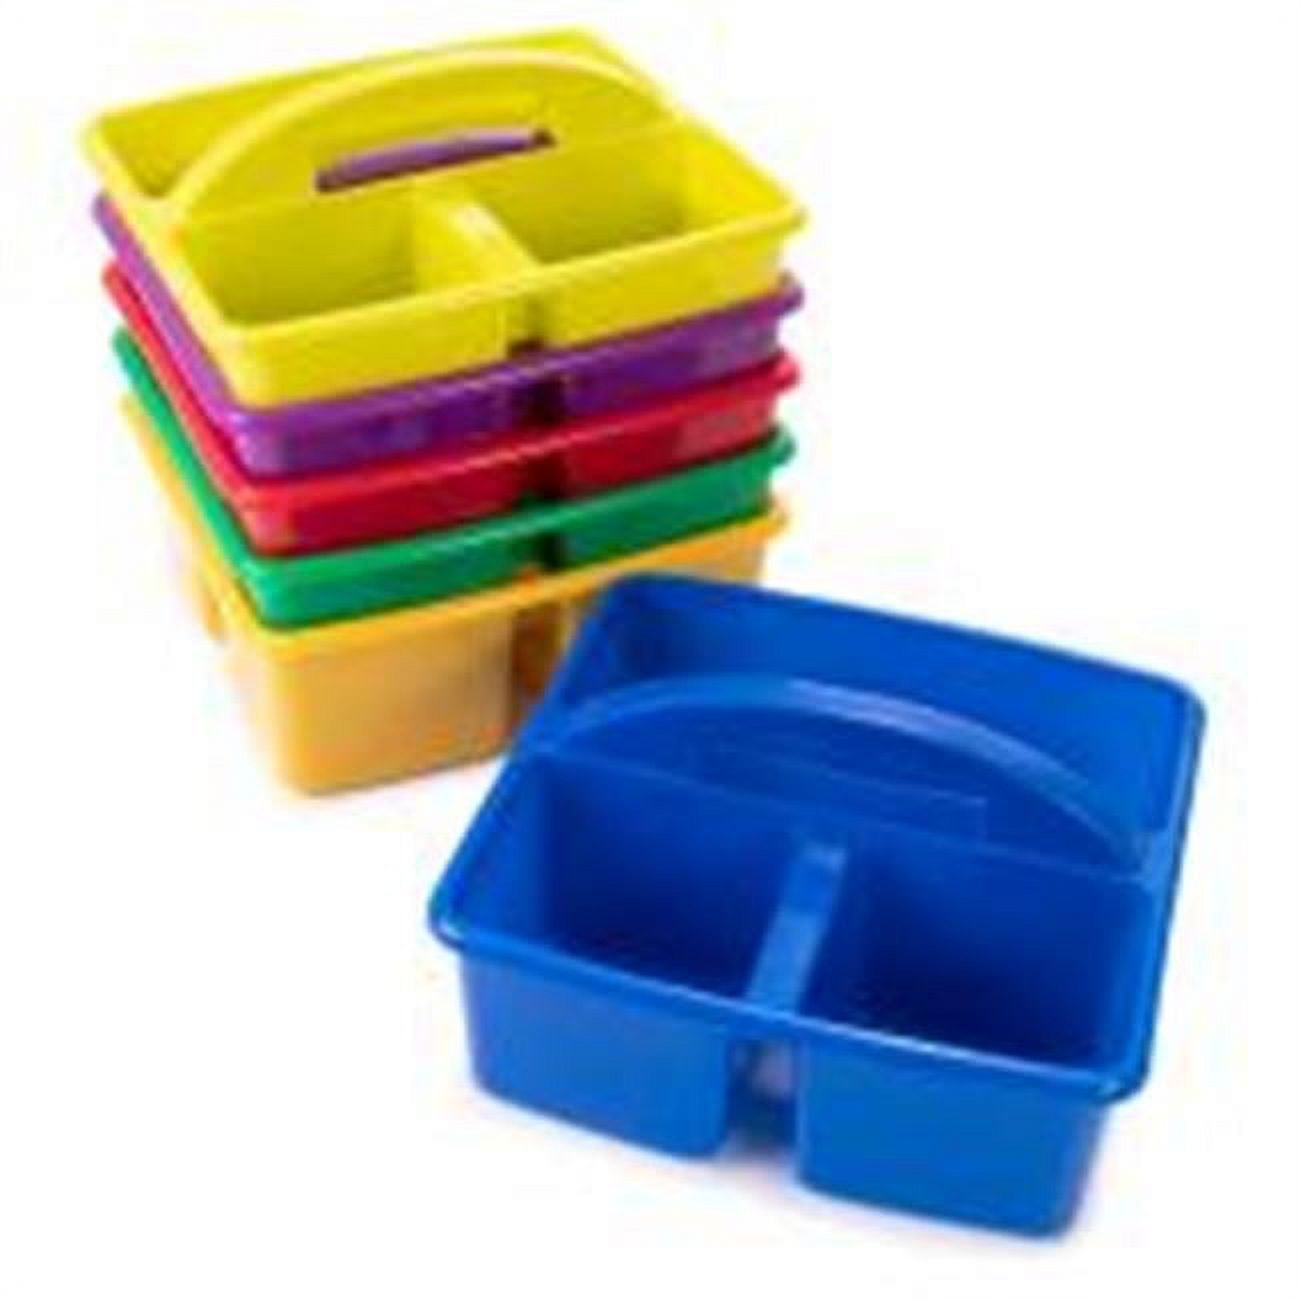 Picture of Brybelly ESUP-005 Storex Classroom Table Caddies, Assorted Color - Pack of 6